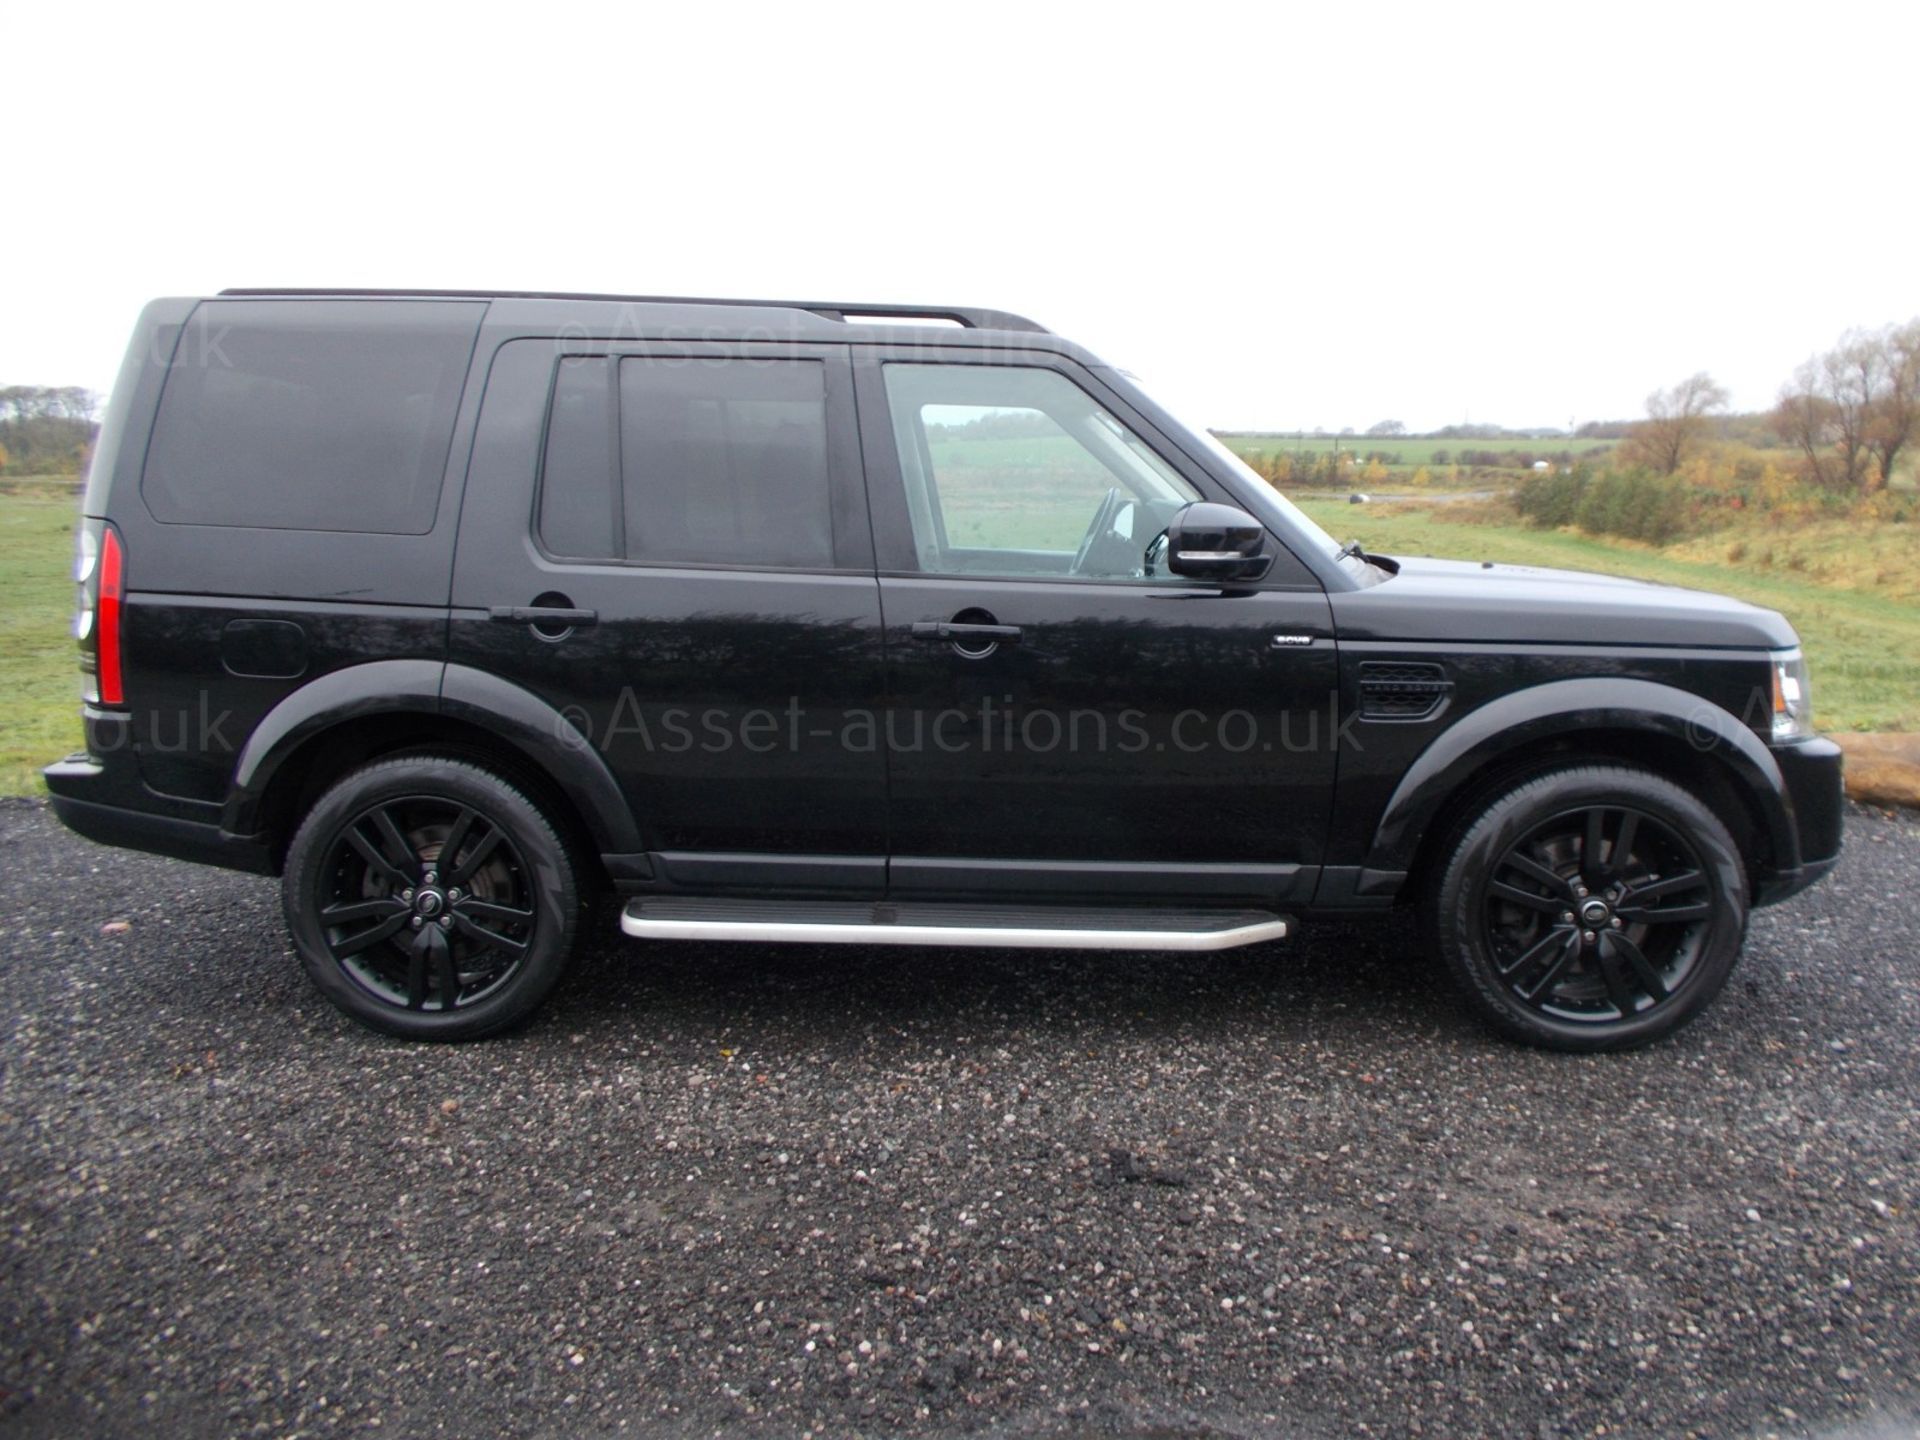 2015/64 LAND ROVER DISCOVERY HSE LUXURY SCV6 7 SEATER, 3.0 V6 PETROL SUPERCHARGED *PLUS VAT* - Image 8 of 27